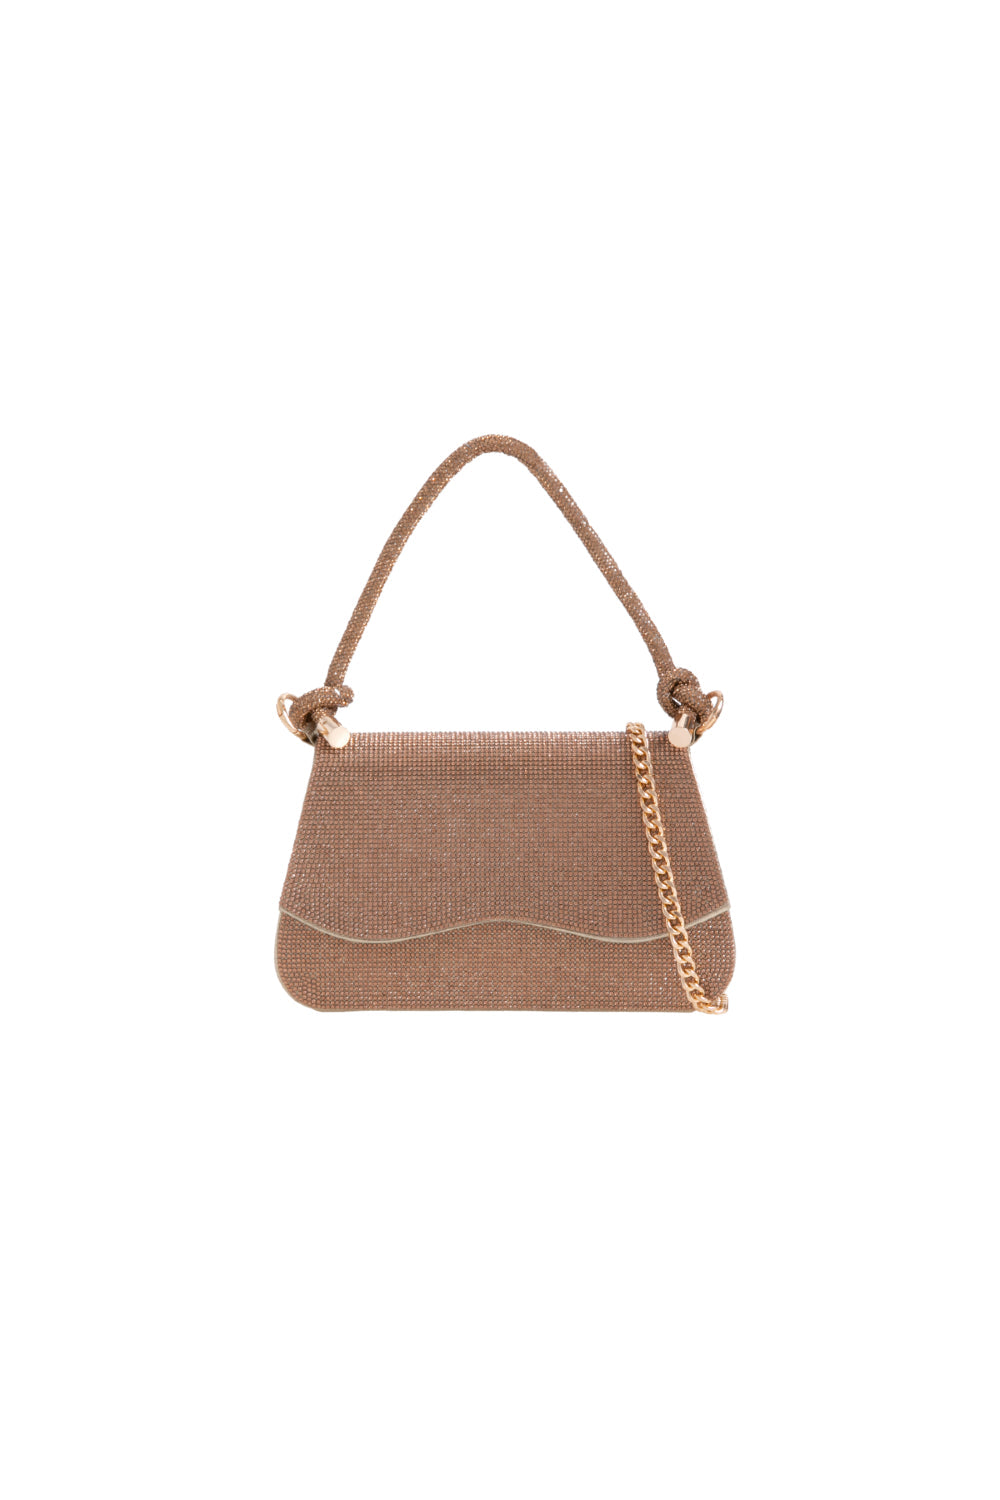 Gold Diamante Top Handle Bag With Knot Details ALLD3220